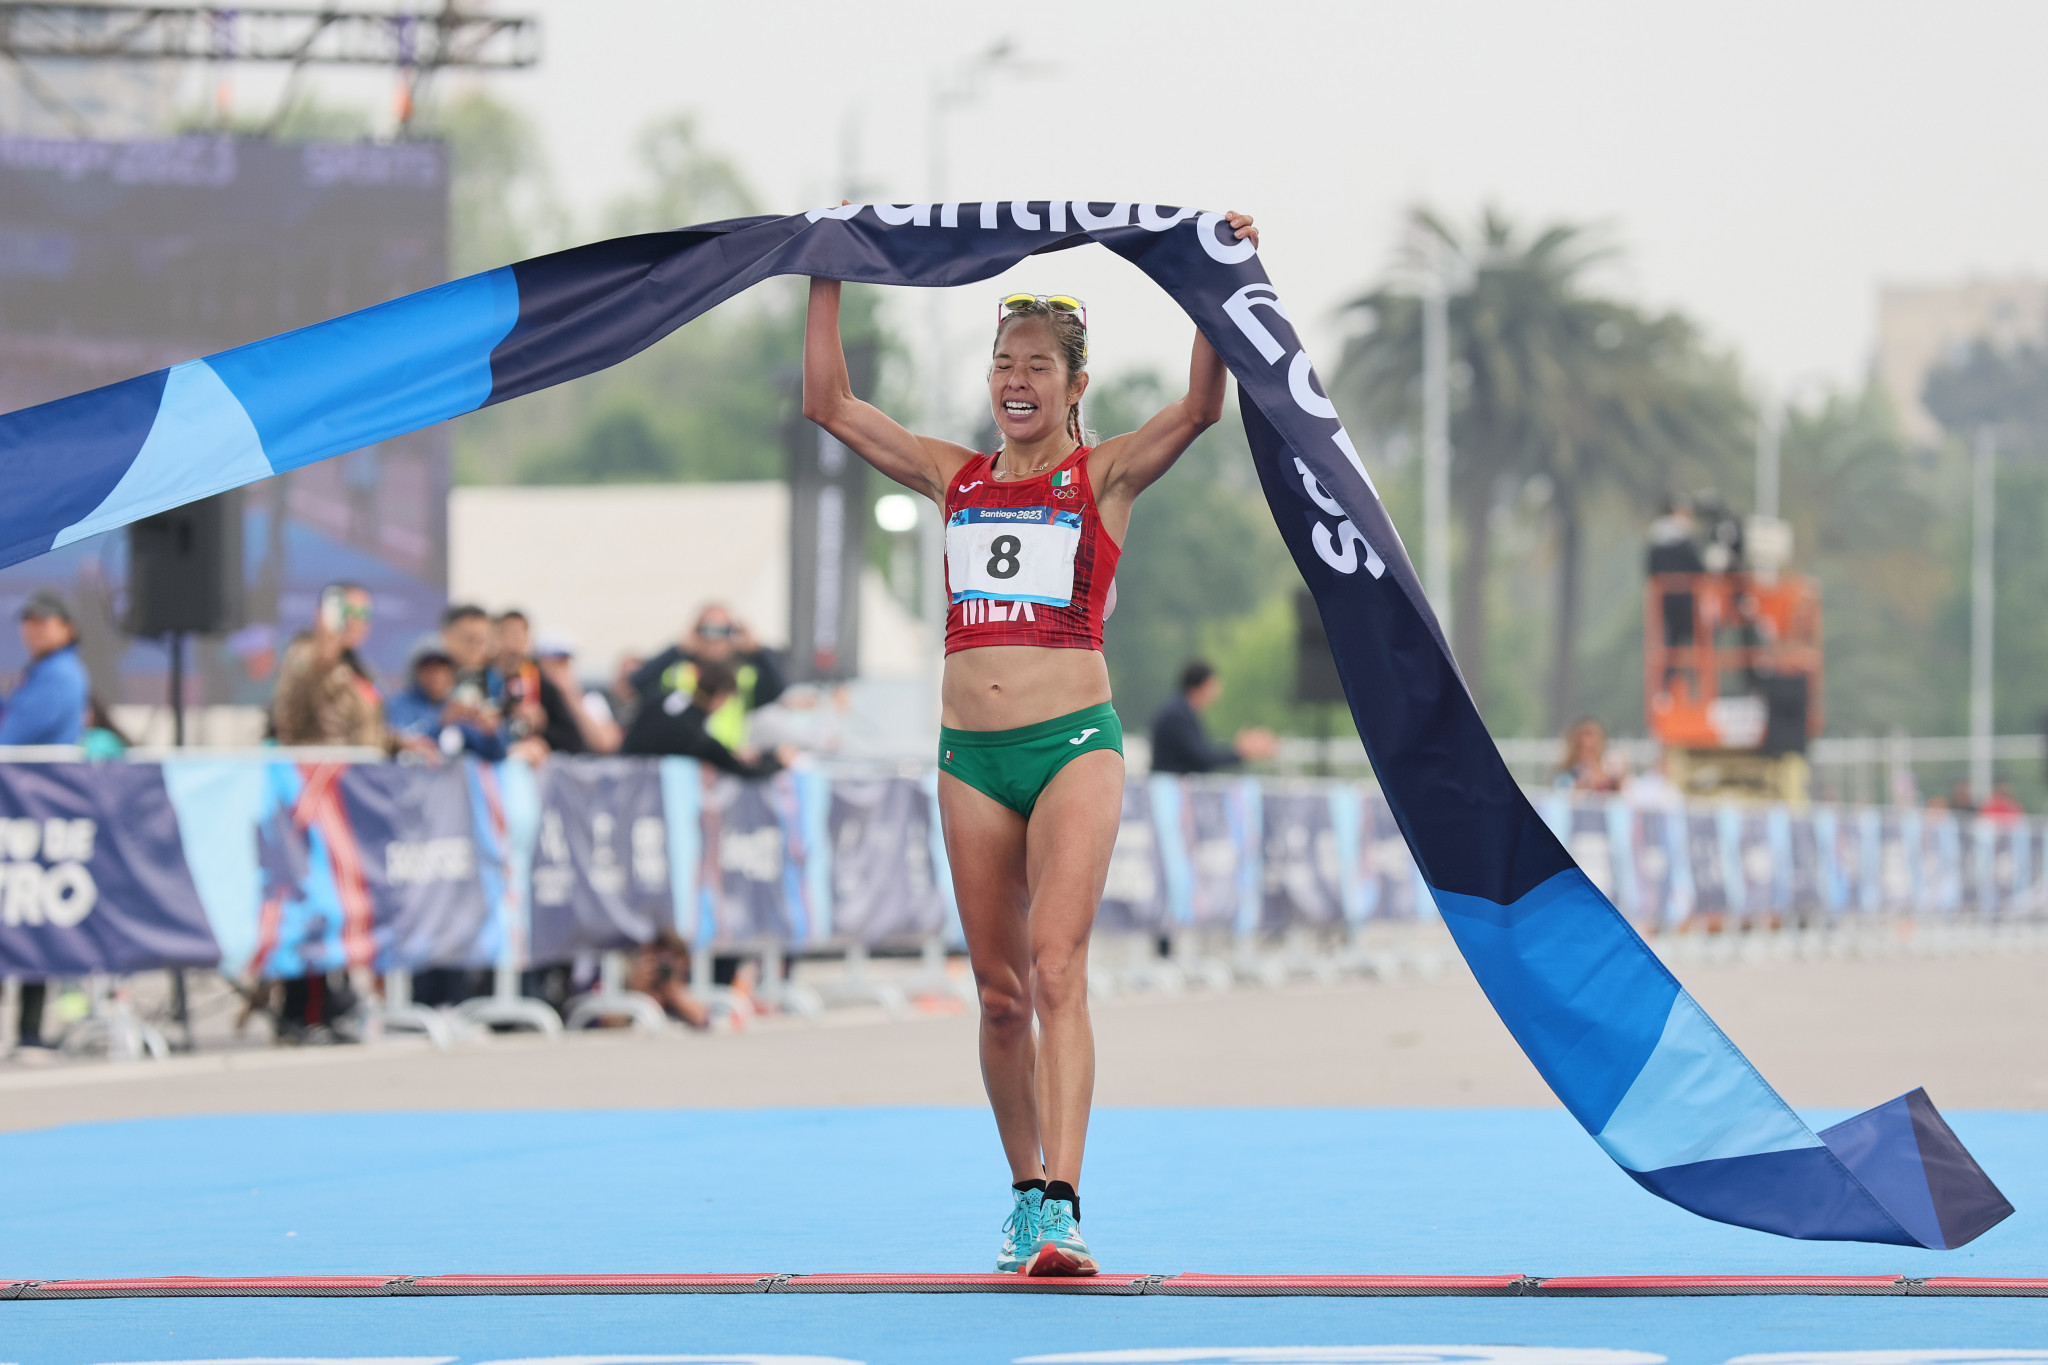 Mexico's Citlali Cristian celebrates on the line after winning the women's marathon ©Getty Images